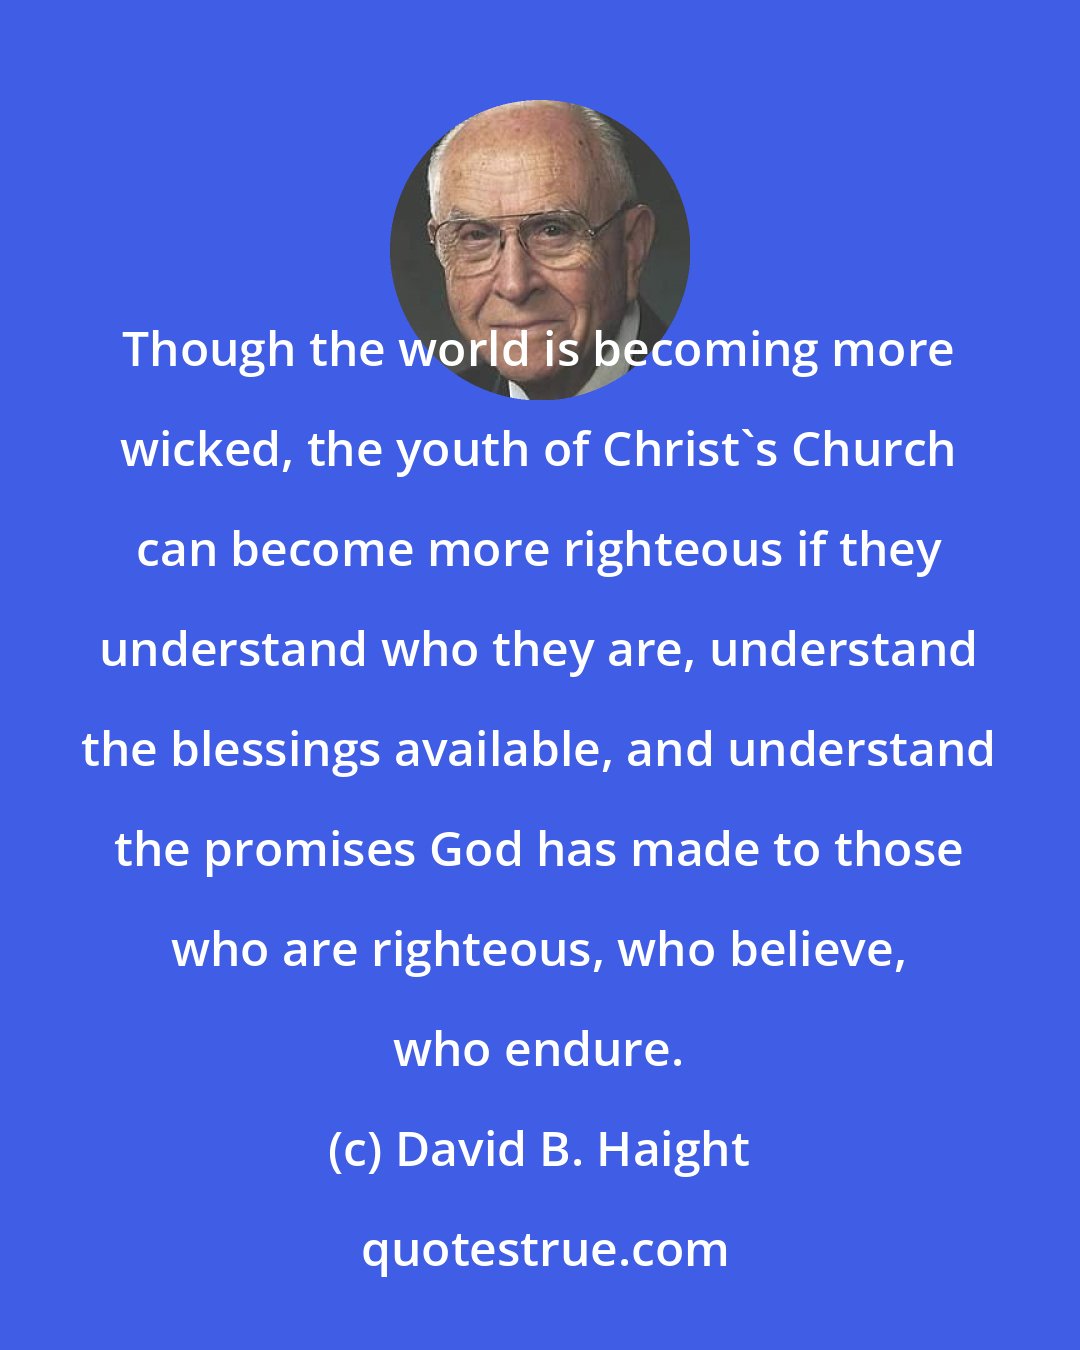 David B. Haight: Though the world is becoming more wicked, the youth of Christ's Church can become more righteous if they understand who they are, understand the blessings available, and understand the promises God has made to those who are righteous, who believe, who endure.